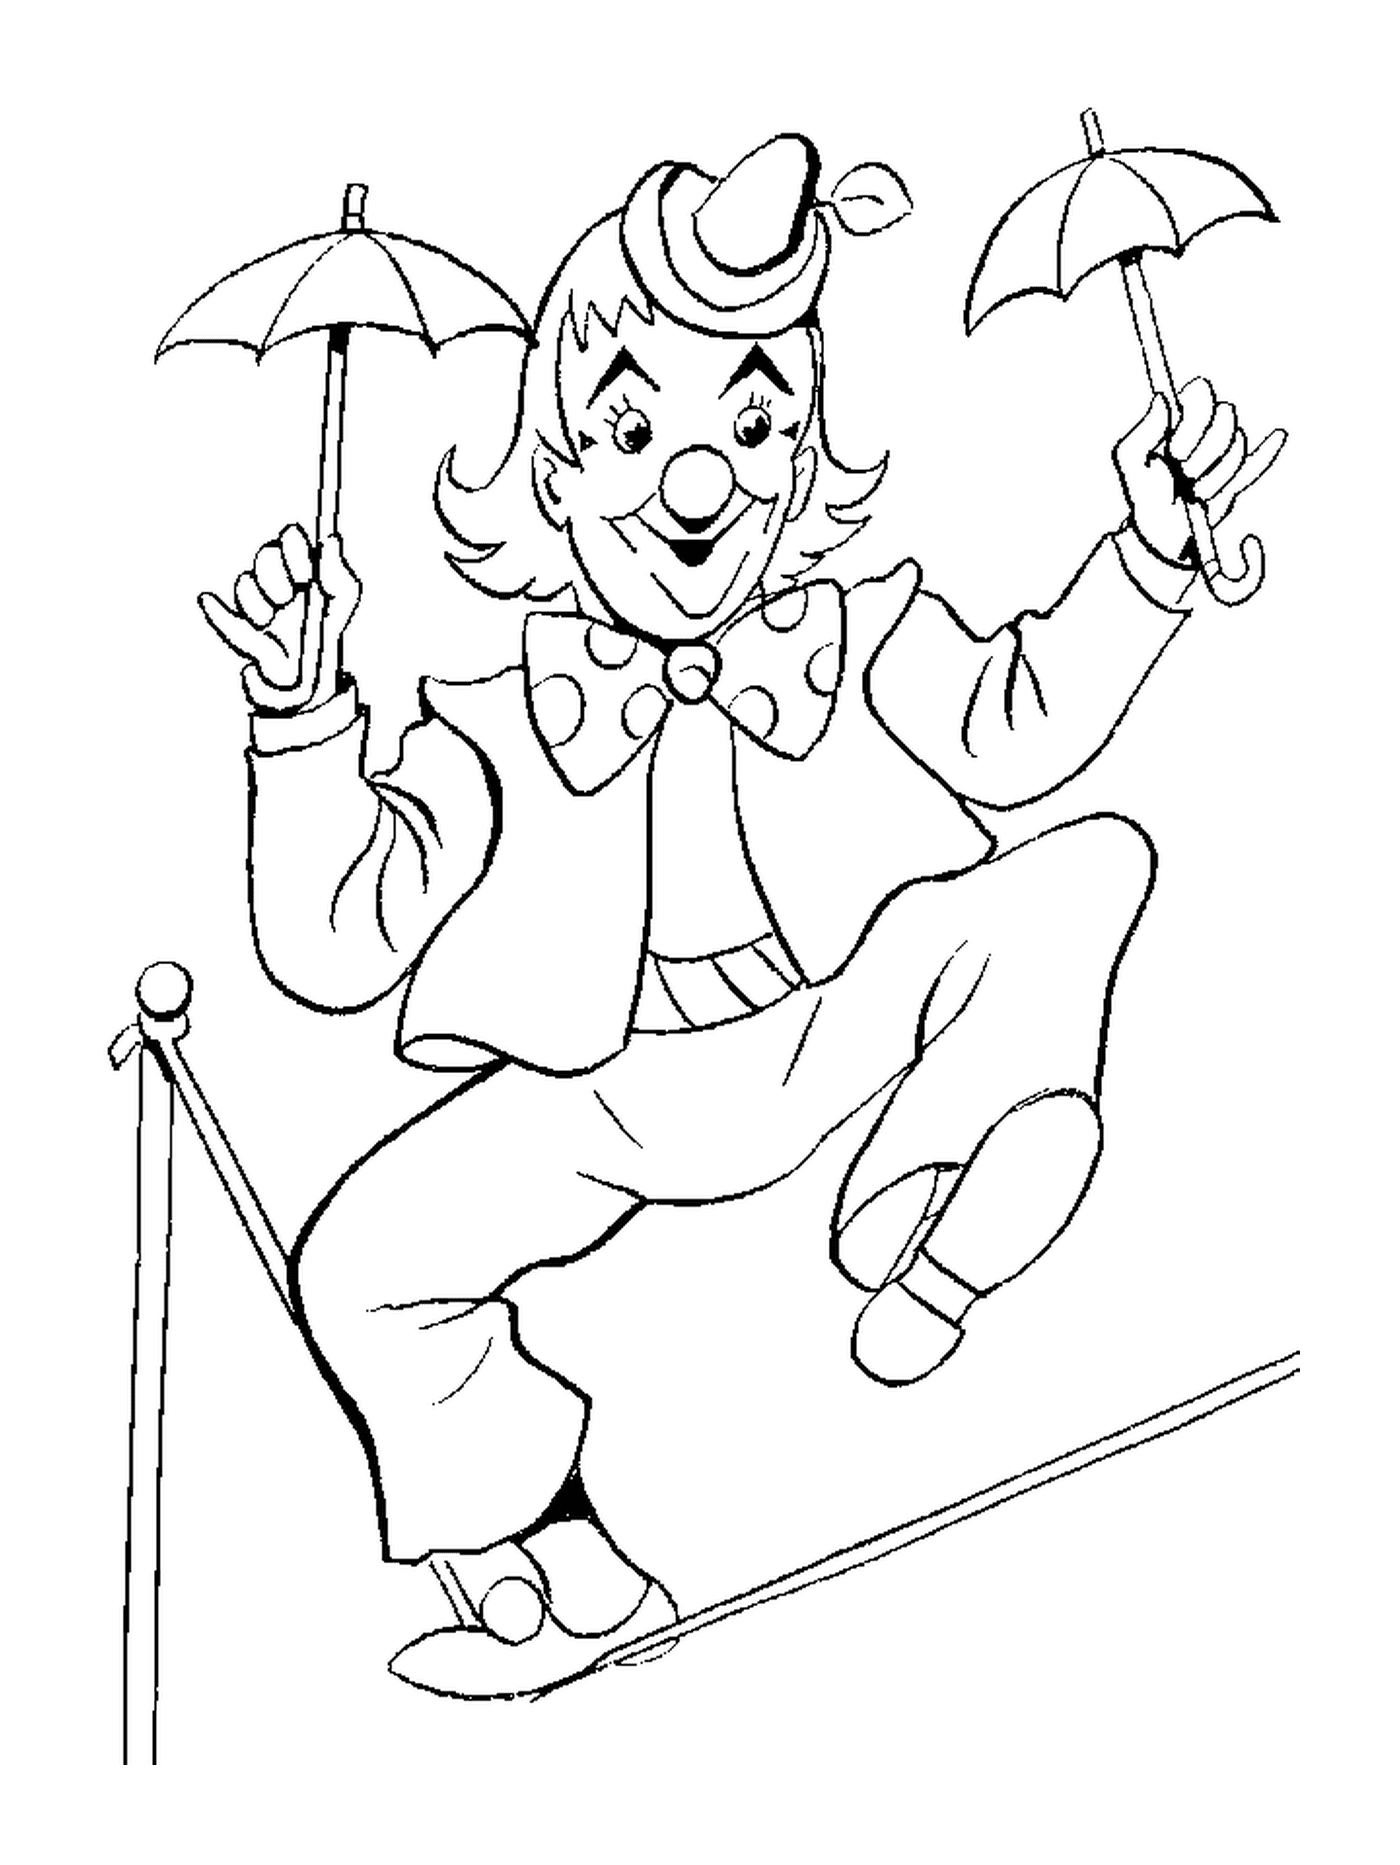  A clown in balance on a wire for the circus 